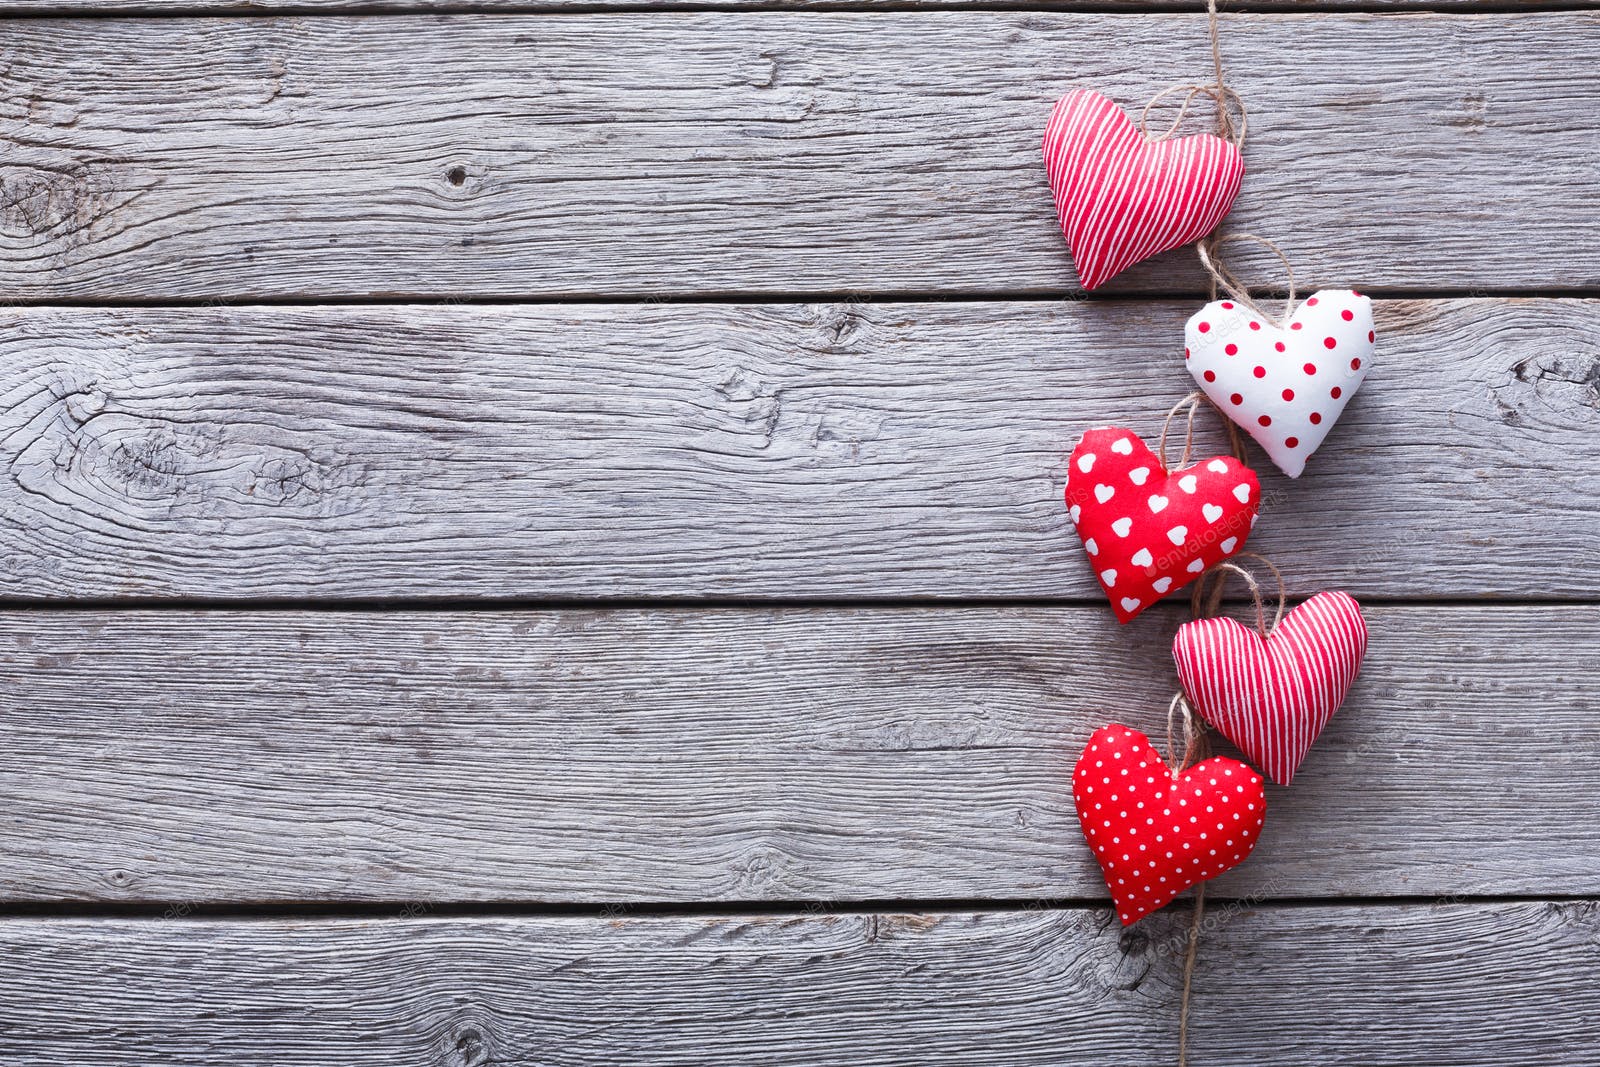 Valentine Day Background, Hearts Bunch On Wood Photo By Prostock Studio On Envato Elements